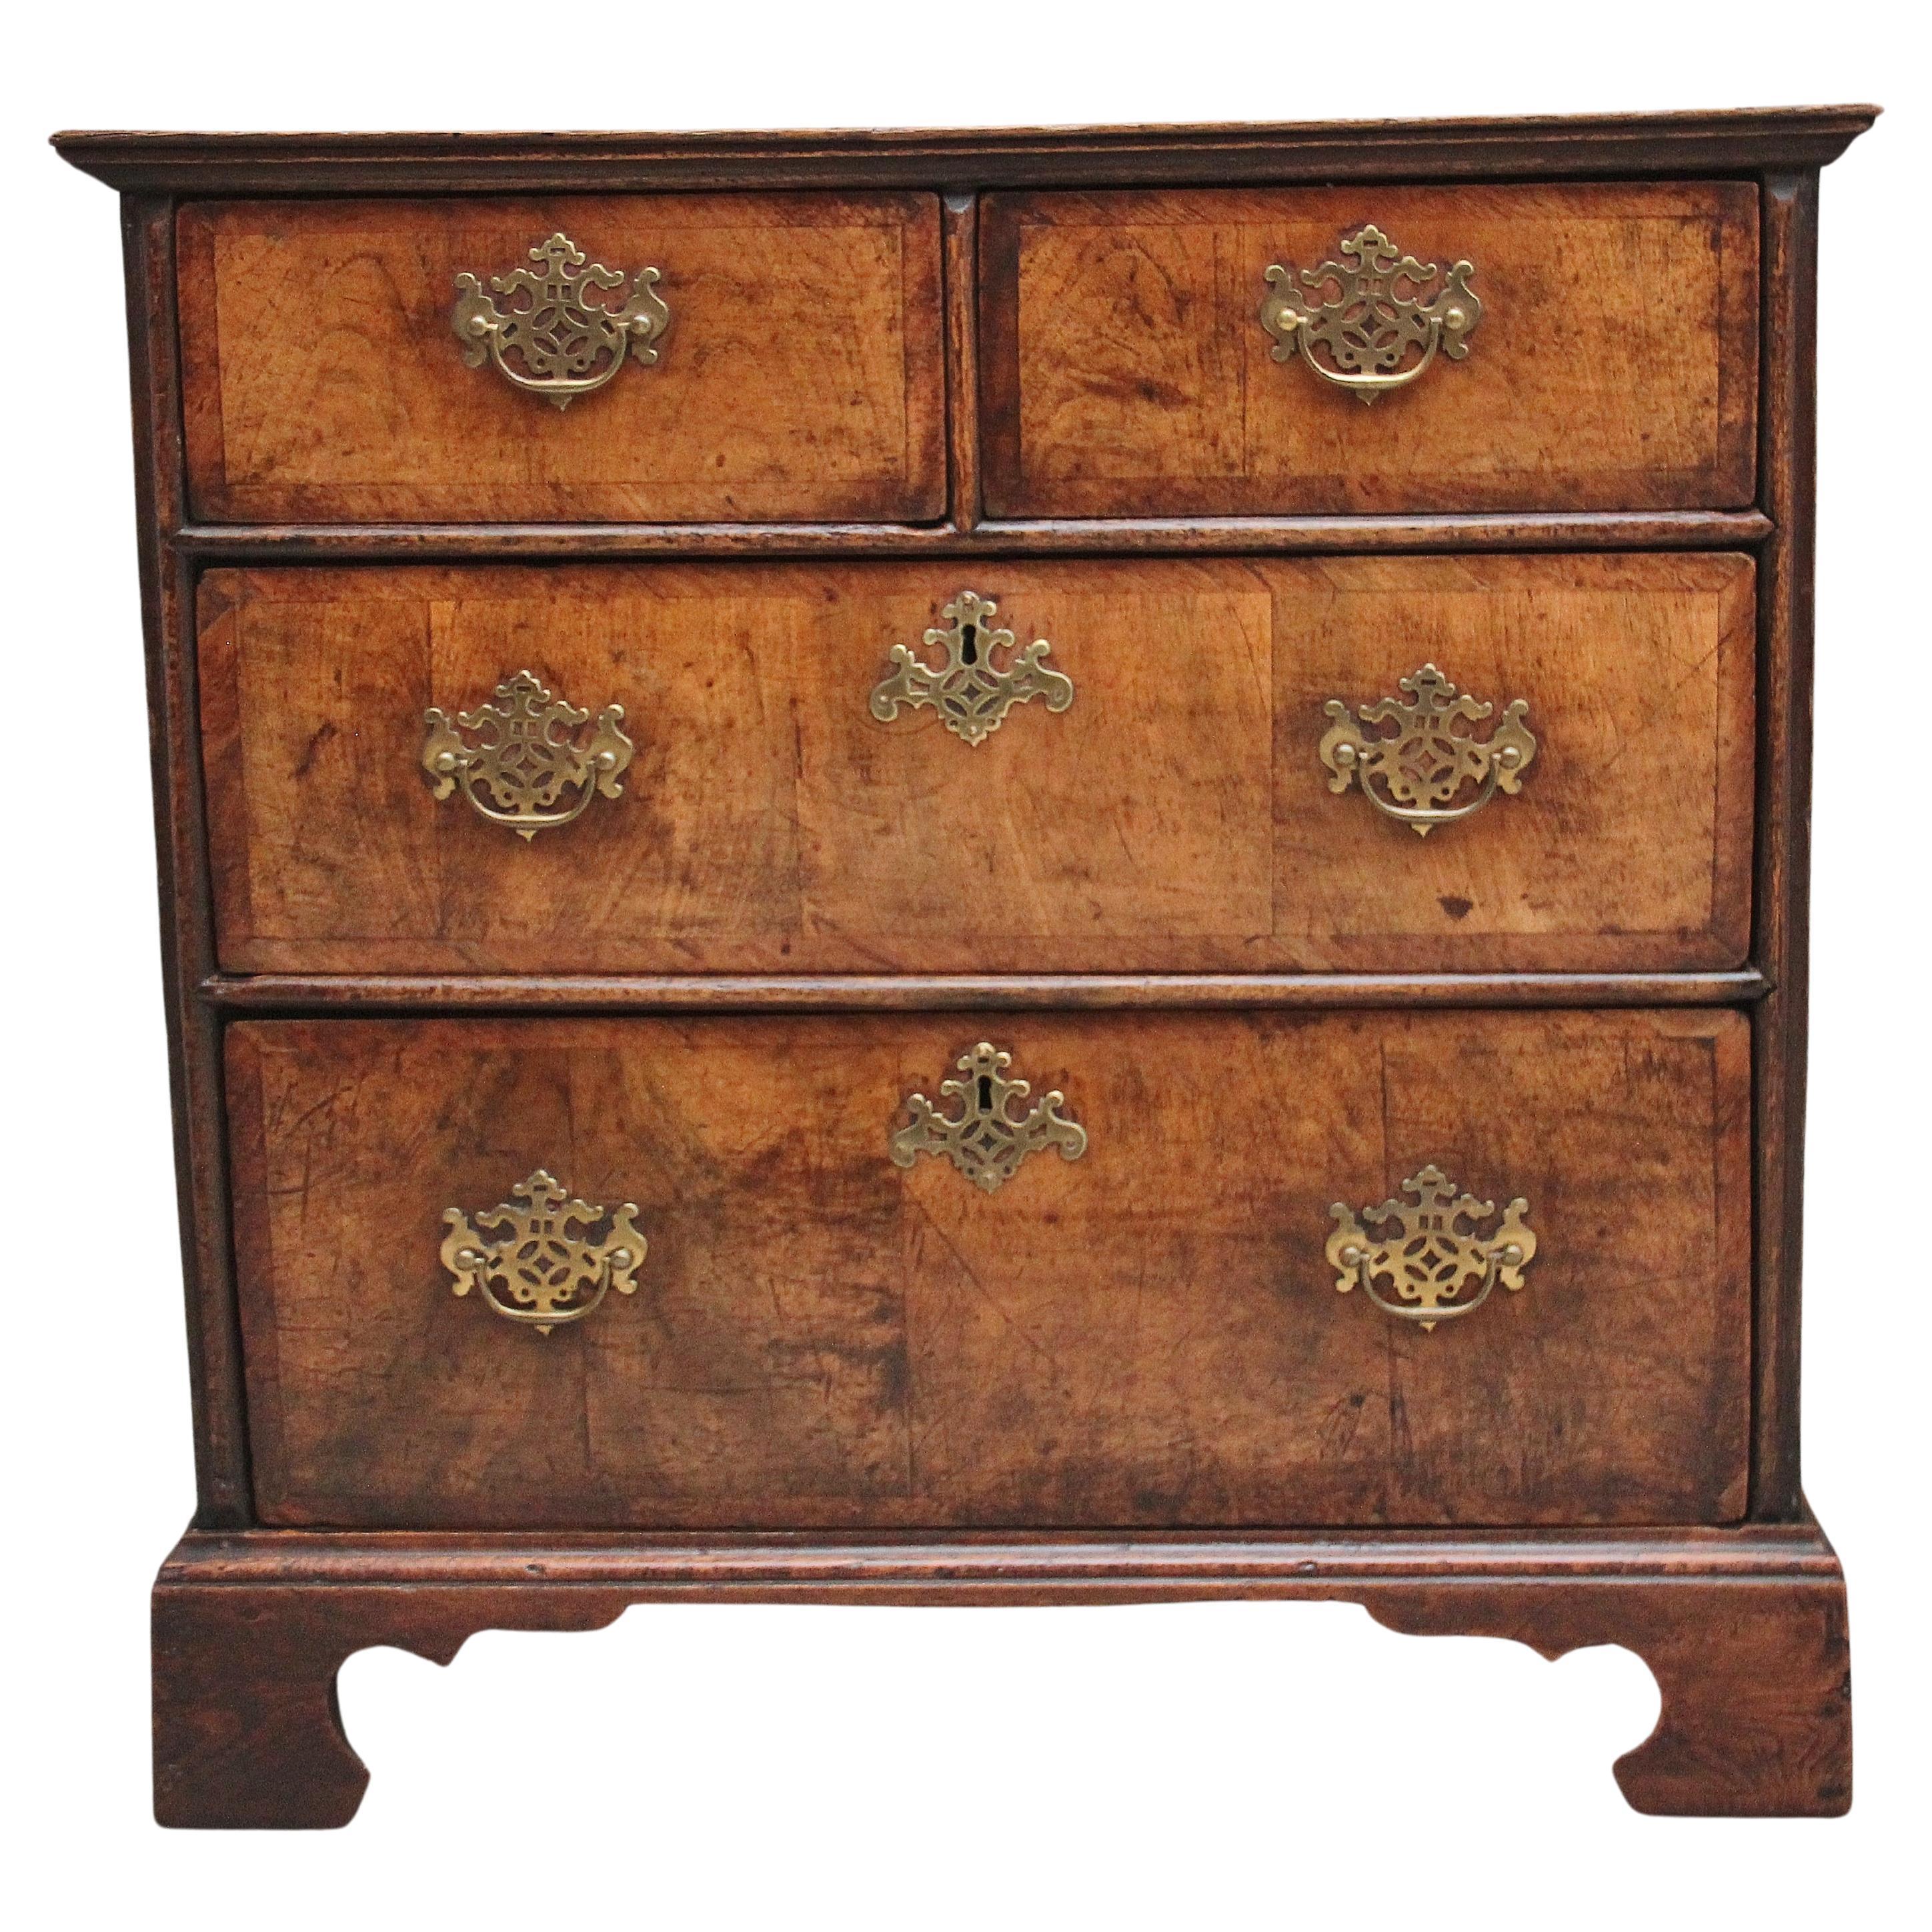 1740s Commodes and Chests of Drawers